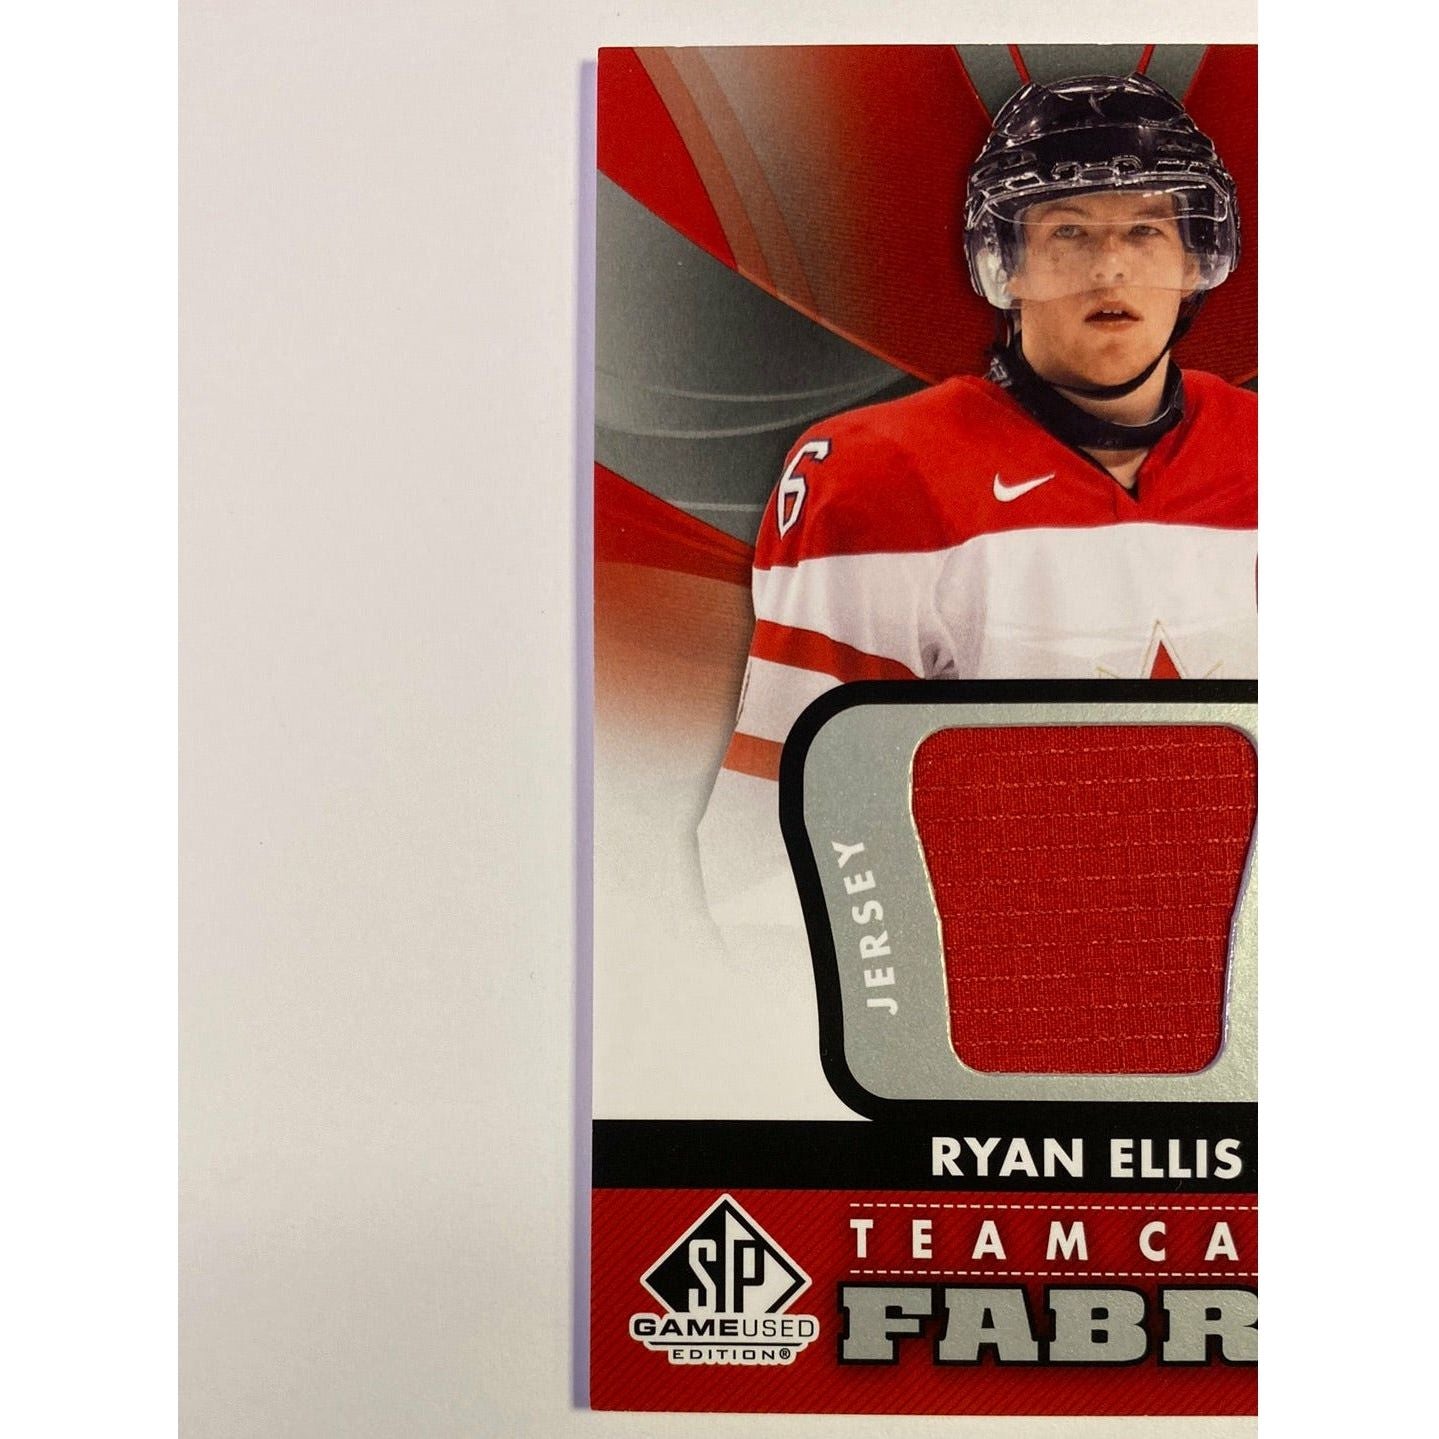  2012-13 SP Game Used Ryan Ellis Team Canada Fabrics  Local Legends Cards & Collectibles